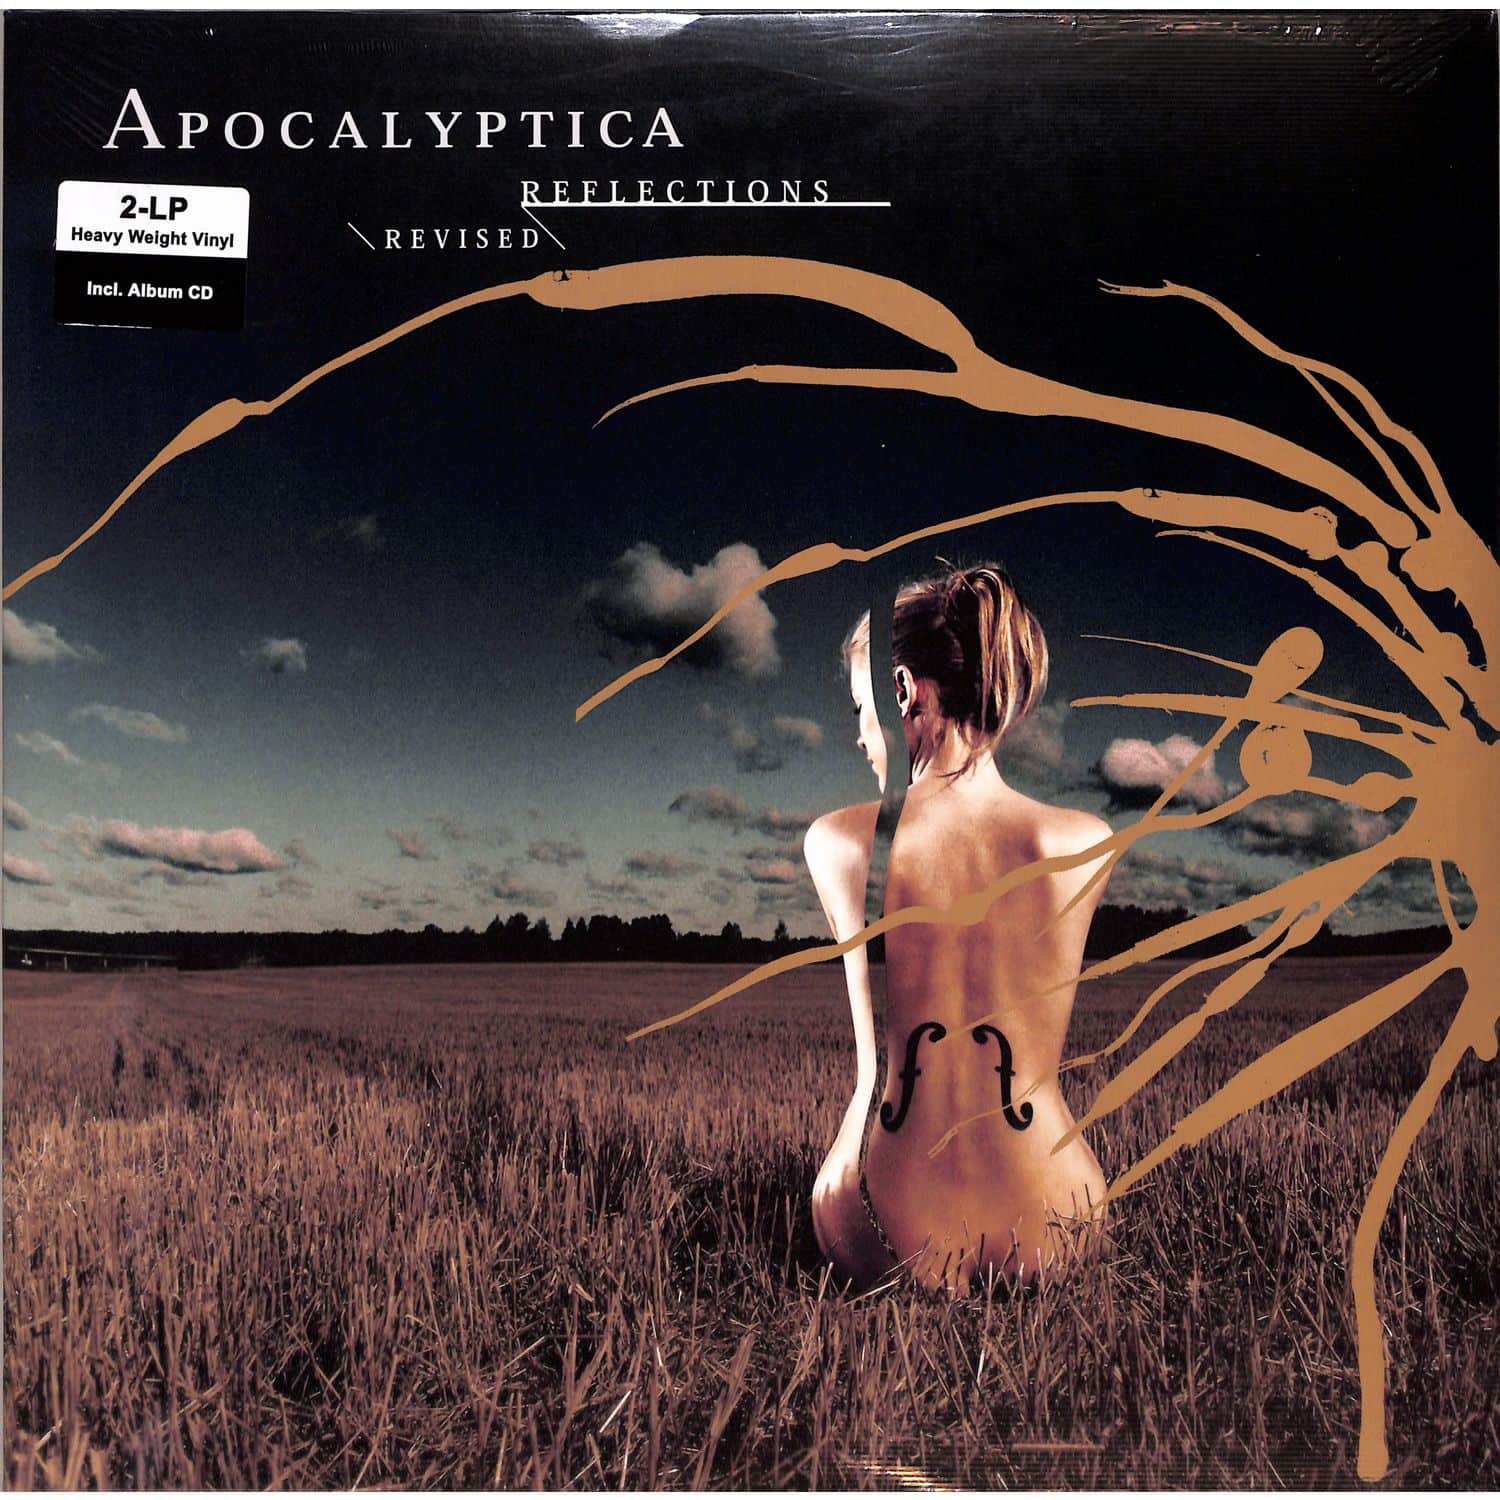 Apocalyptica - REFLECTIONS REVISED 